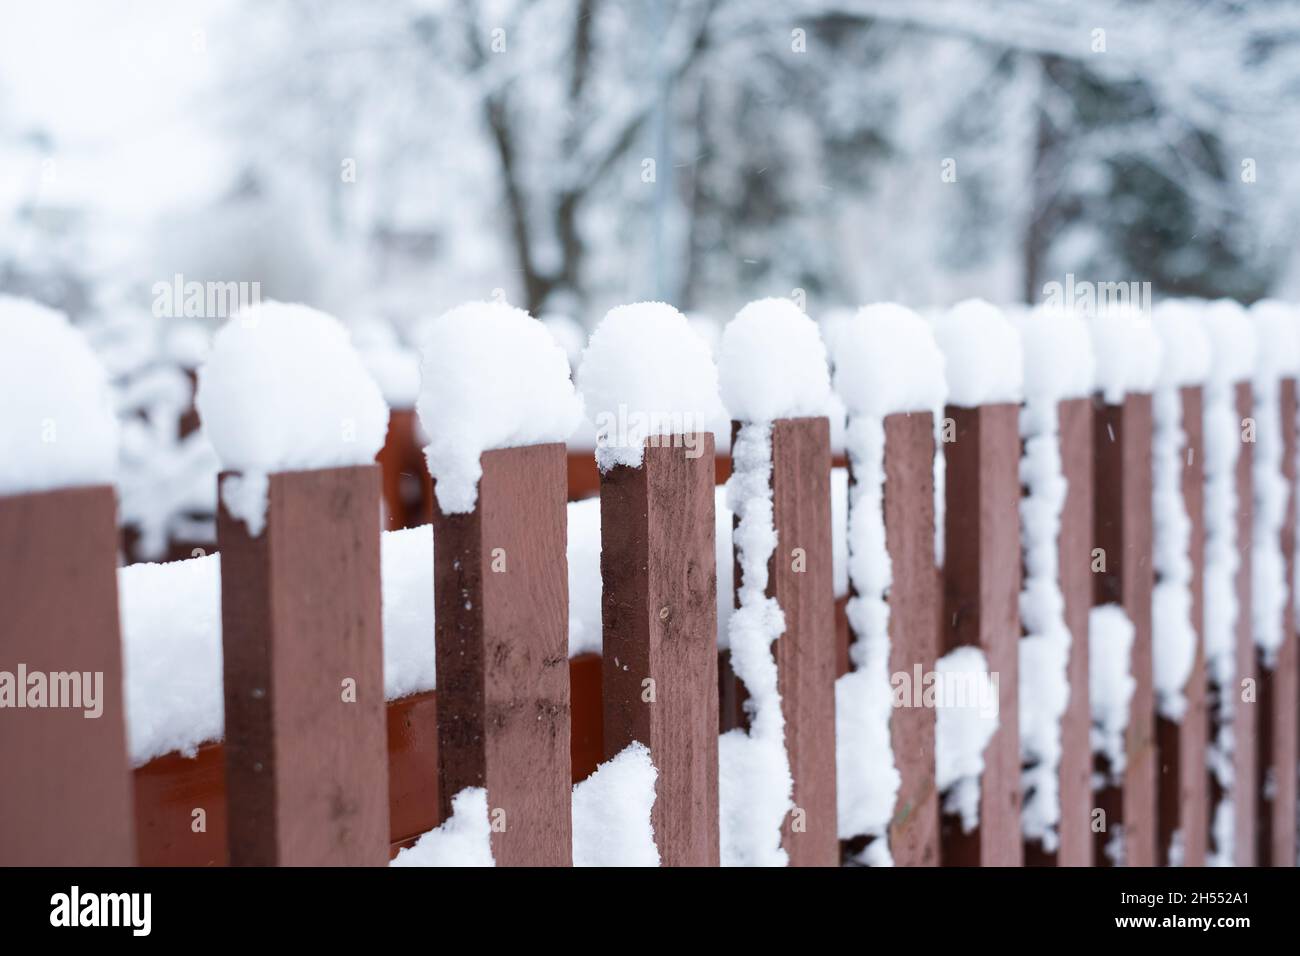 Snow cover. Winter weather. Garden under snow. Close-up of wooden fence covered in snow during winter season. Stock Photo